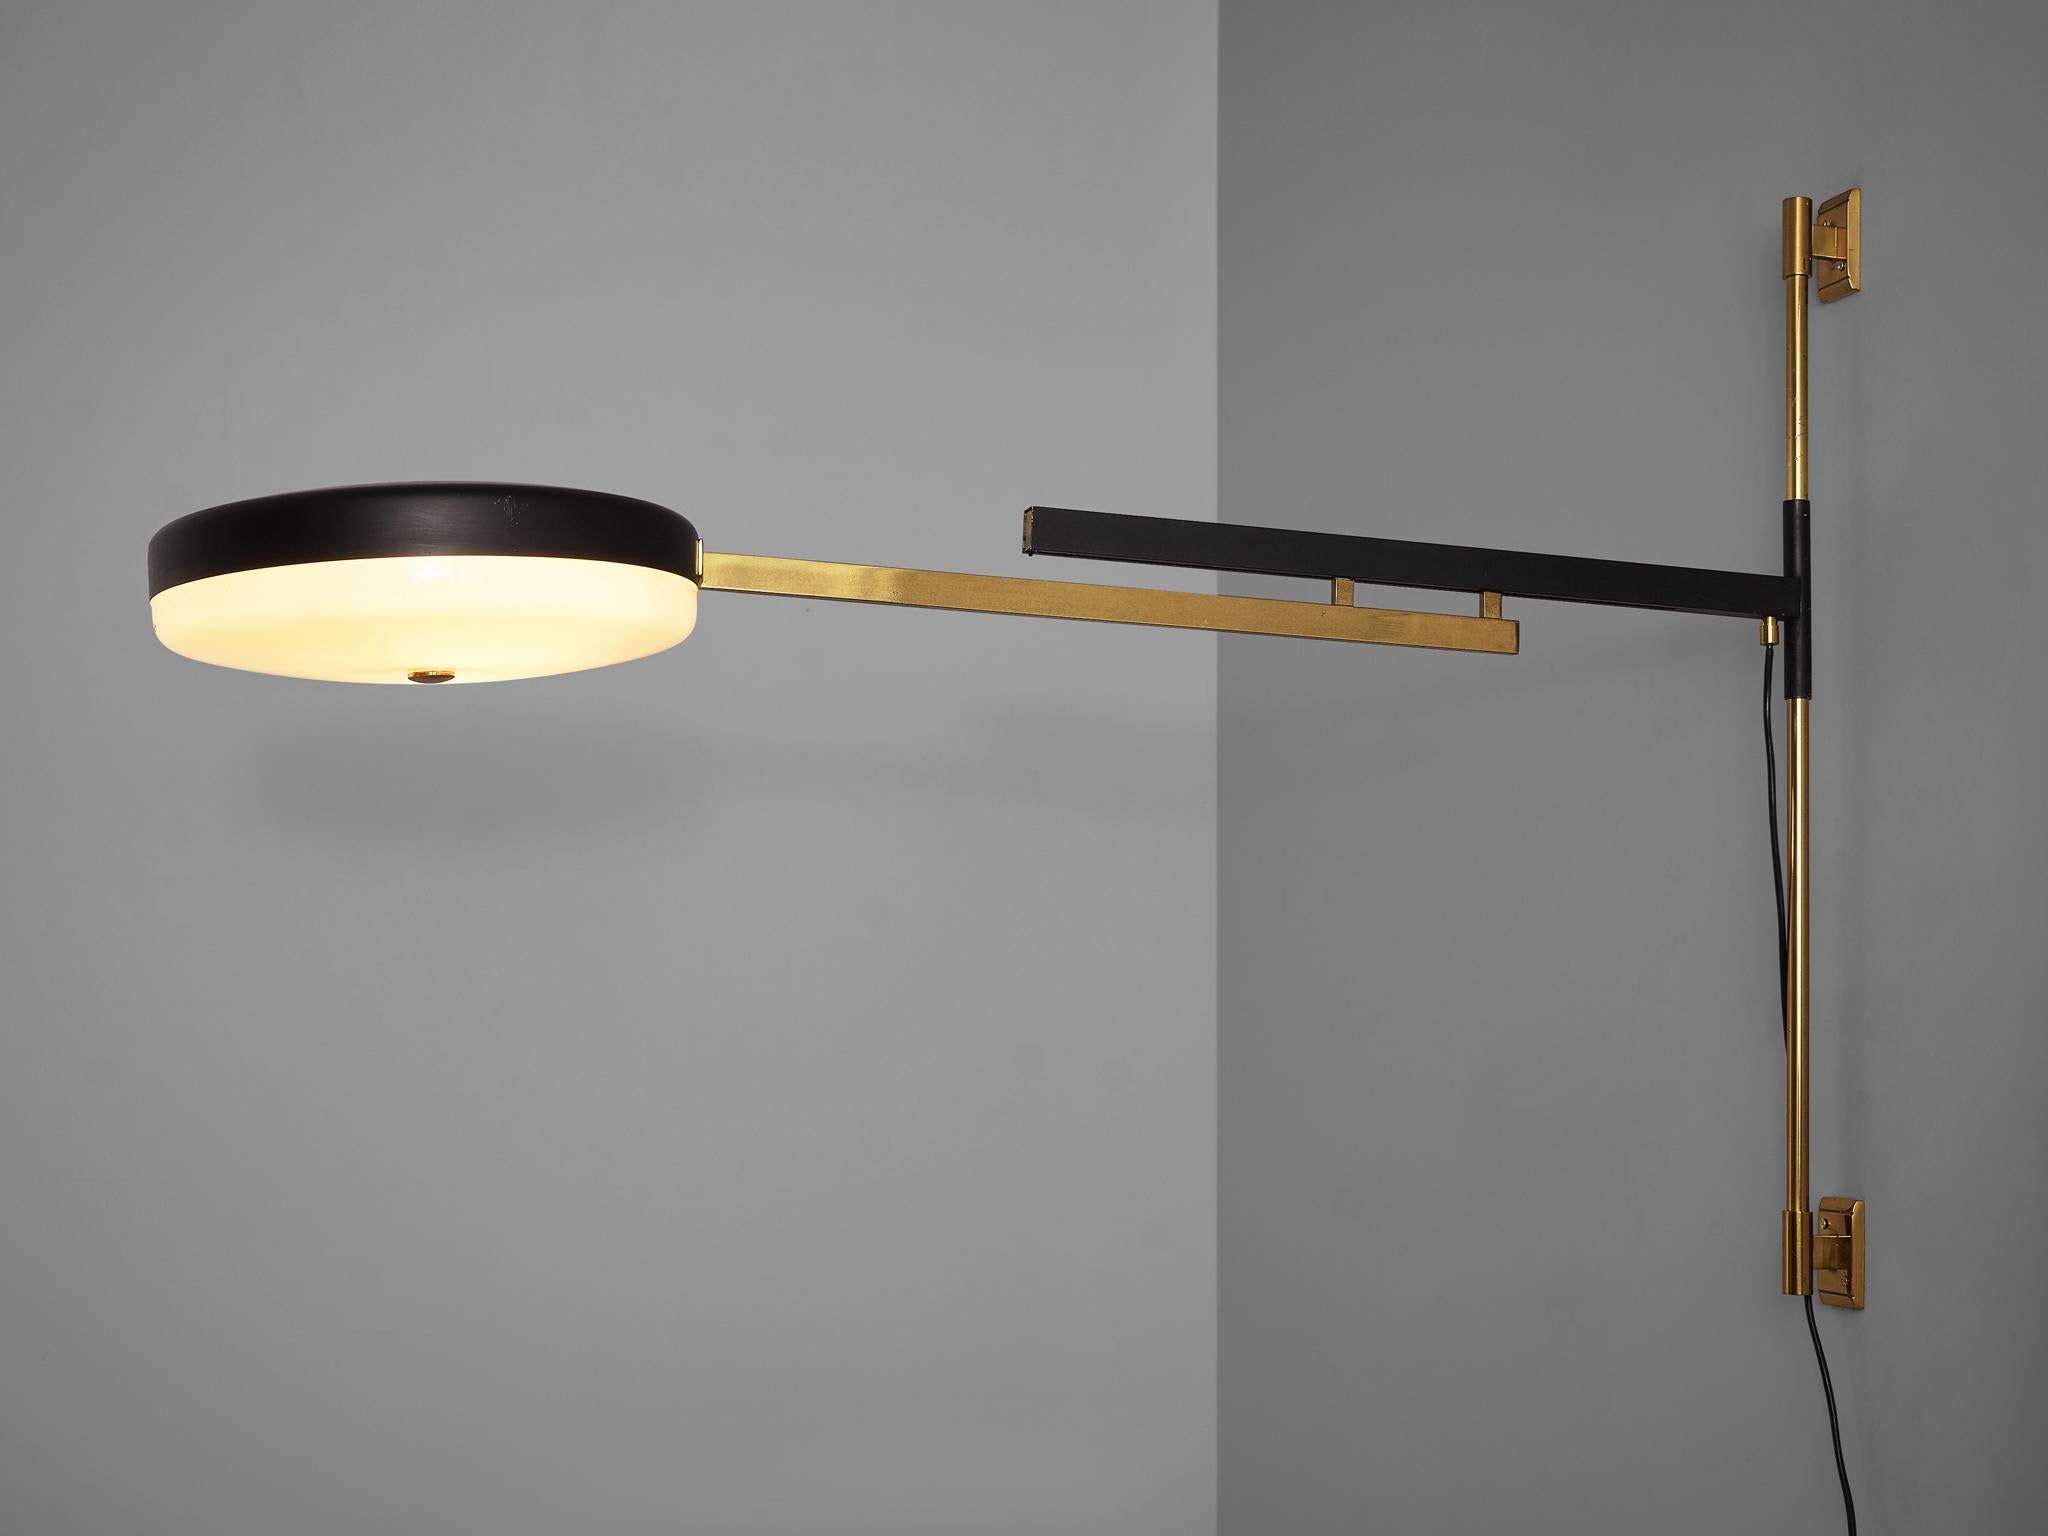 Stilux, wall-mounted lamp, metal, brass, acrylic, Italy, 1950s

Exquisite Italian lamp with extendable arm. This wall-mounted lamp by Italian manufacturer Stilux features two arms that are adjustable in their length. A long vertical bar functions as